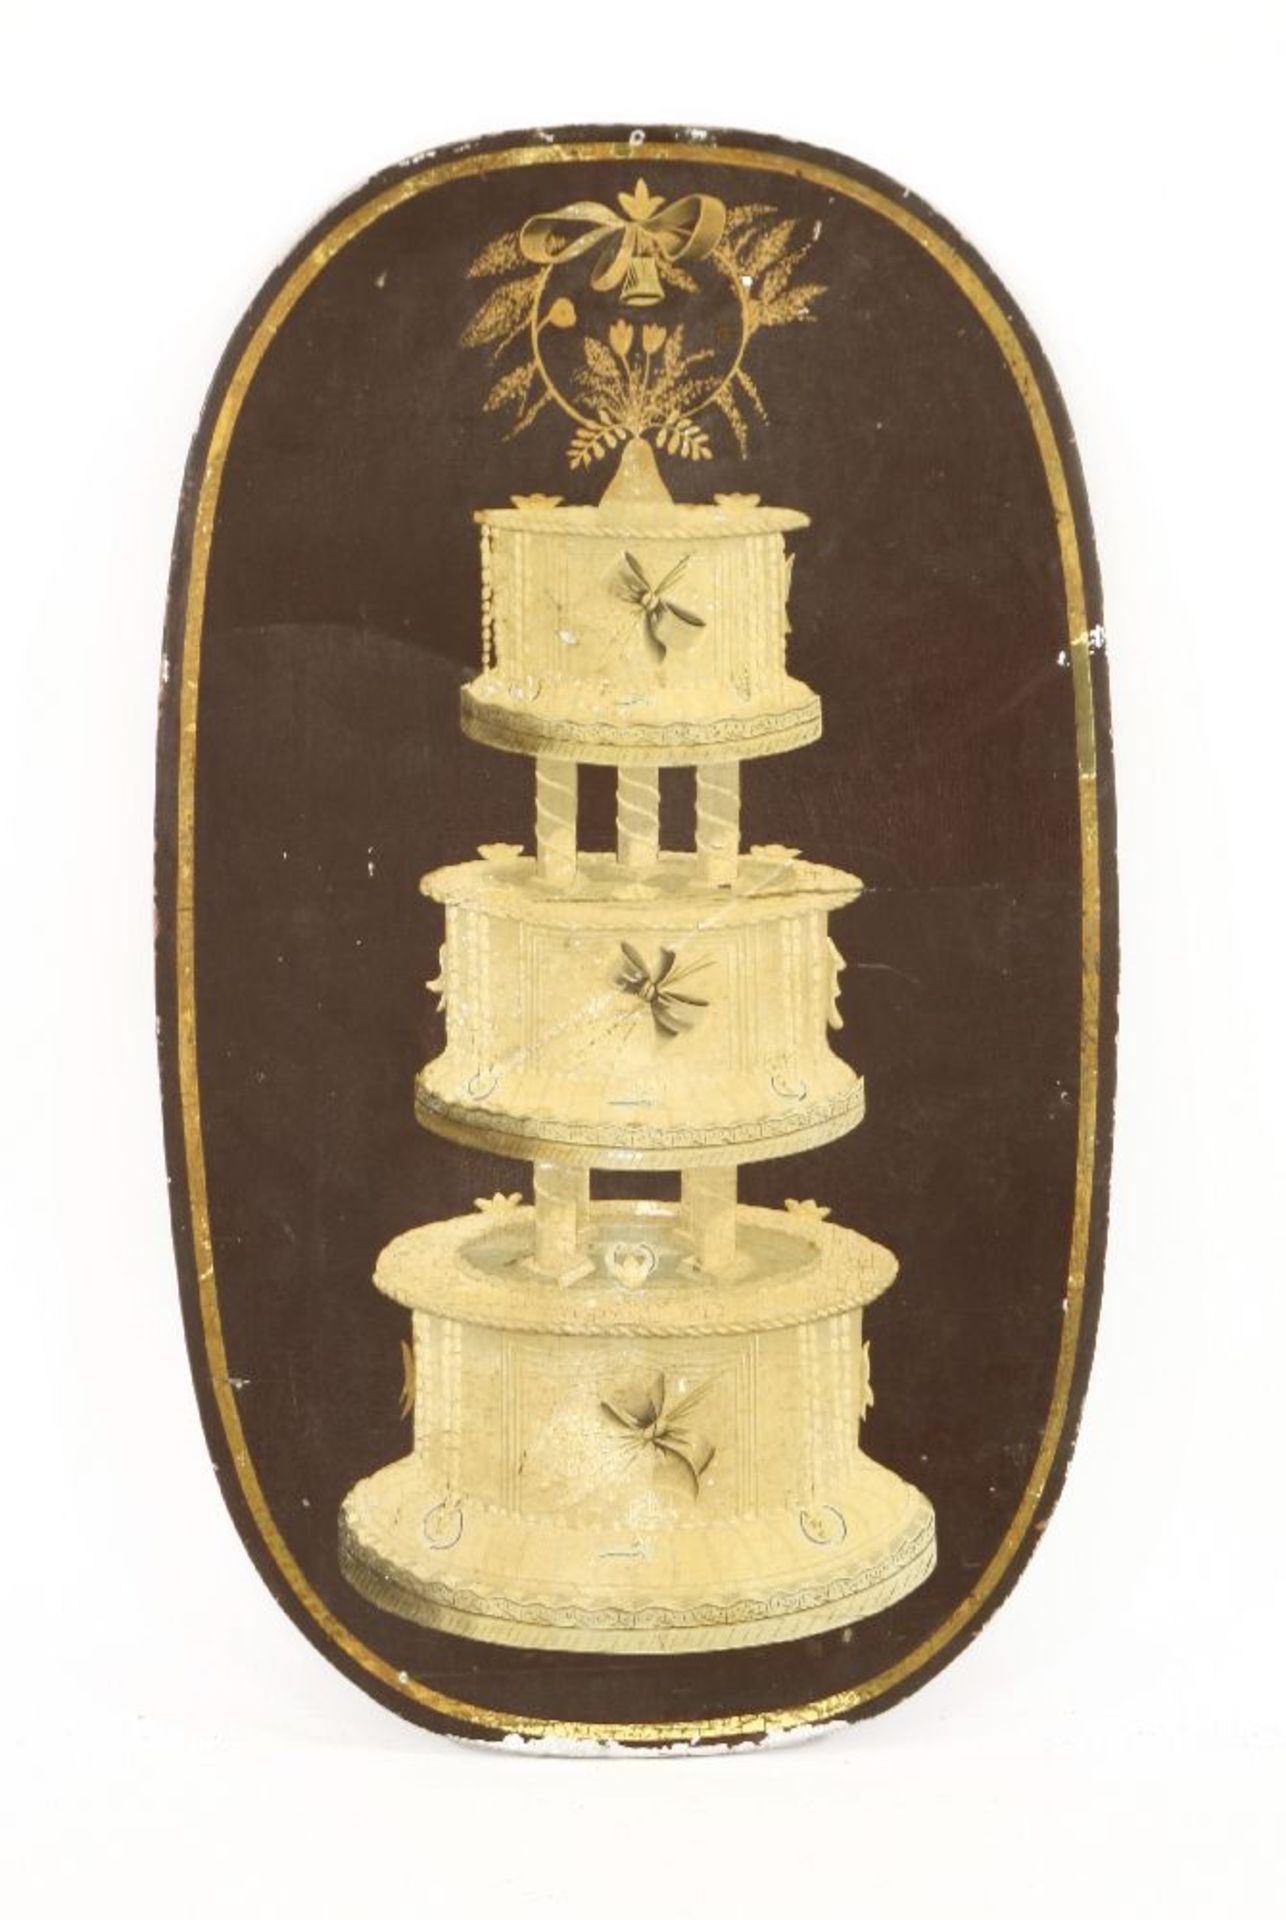 A FRENCH WEDDING CAKE PAINTED TRADE SIGN,c.1860-1880, japanned metal with wooden backing, from a